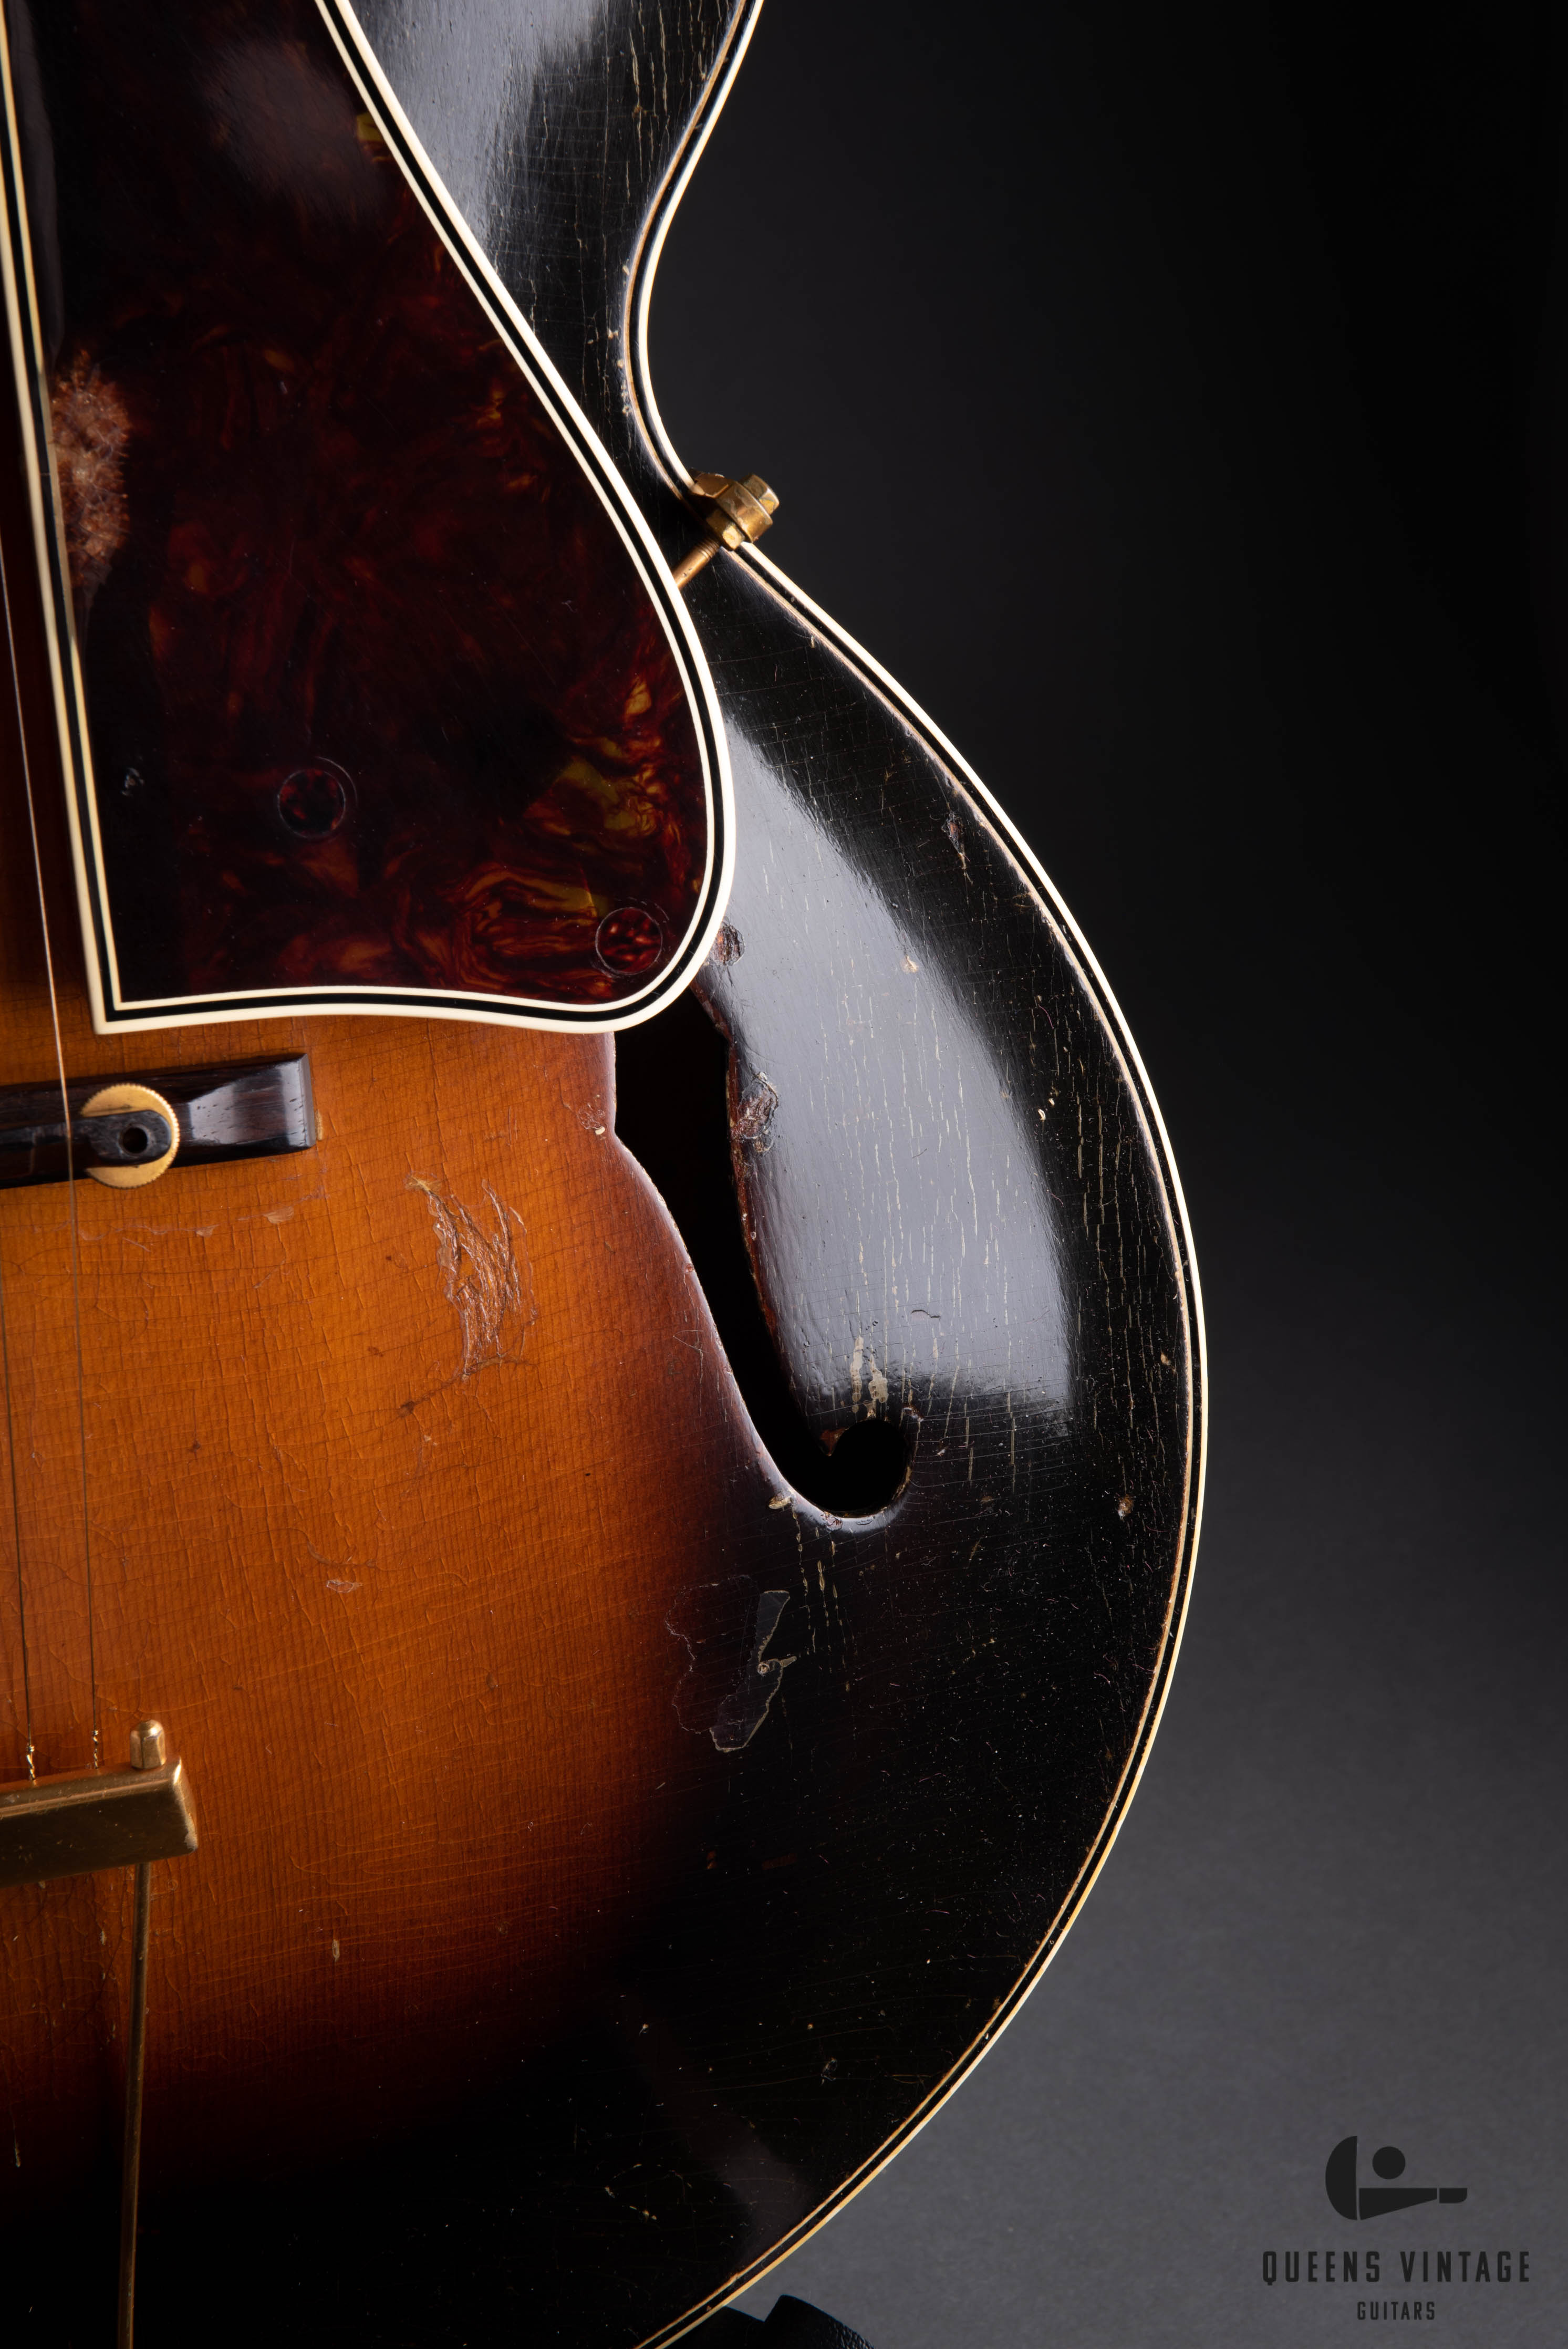 1935 Gibson L-12 Archtop Acoustic Guitar